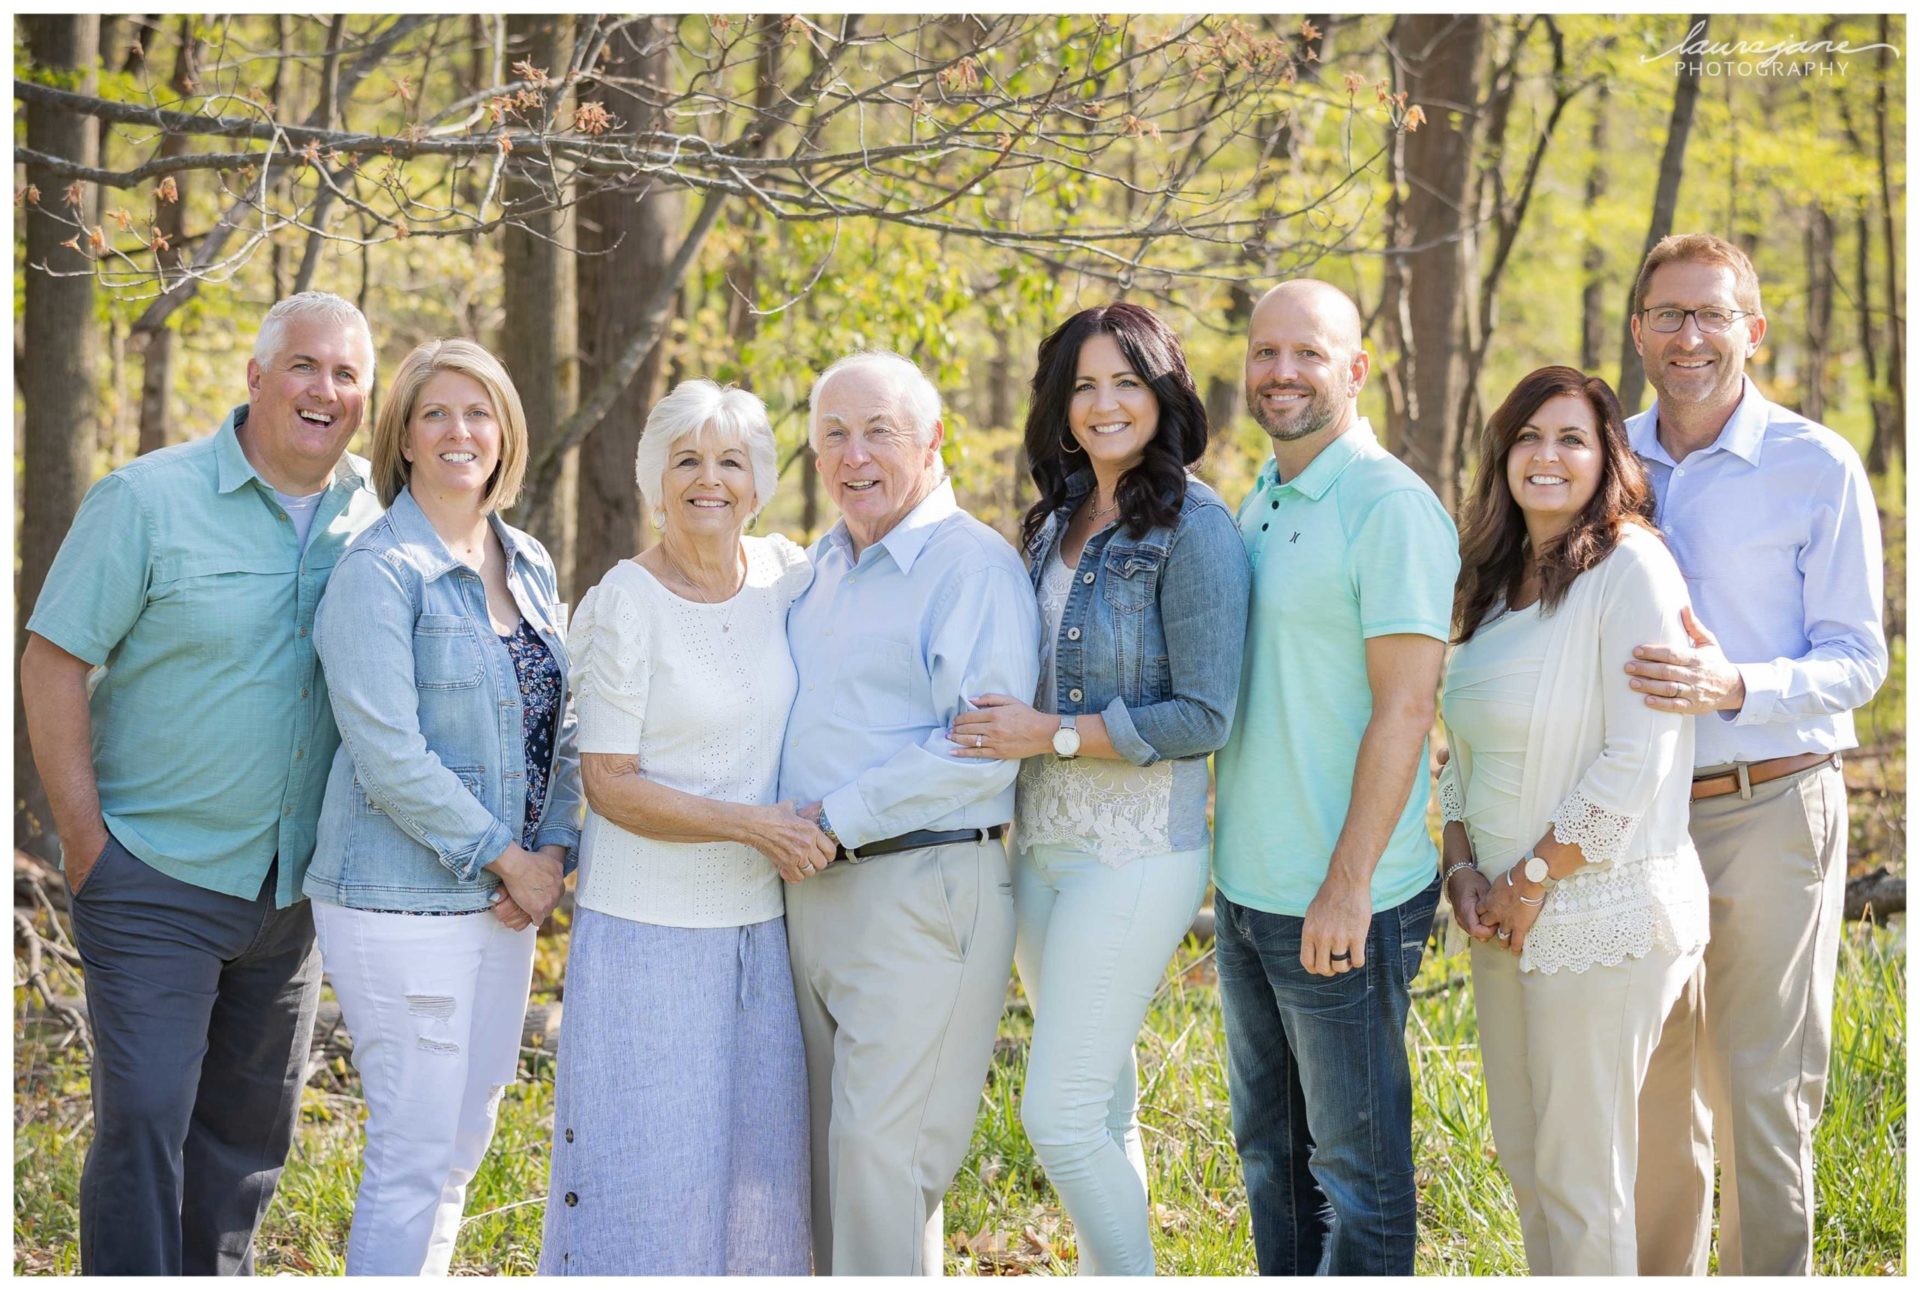 large family posing | Family picture poses, Large family photography, Large  family portraits